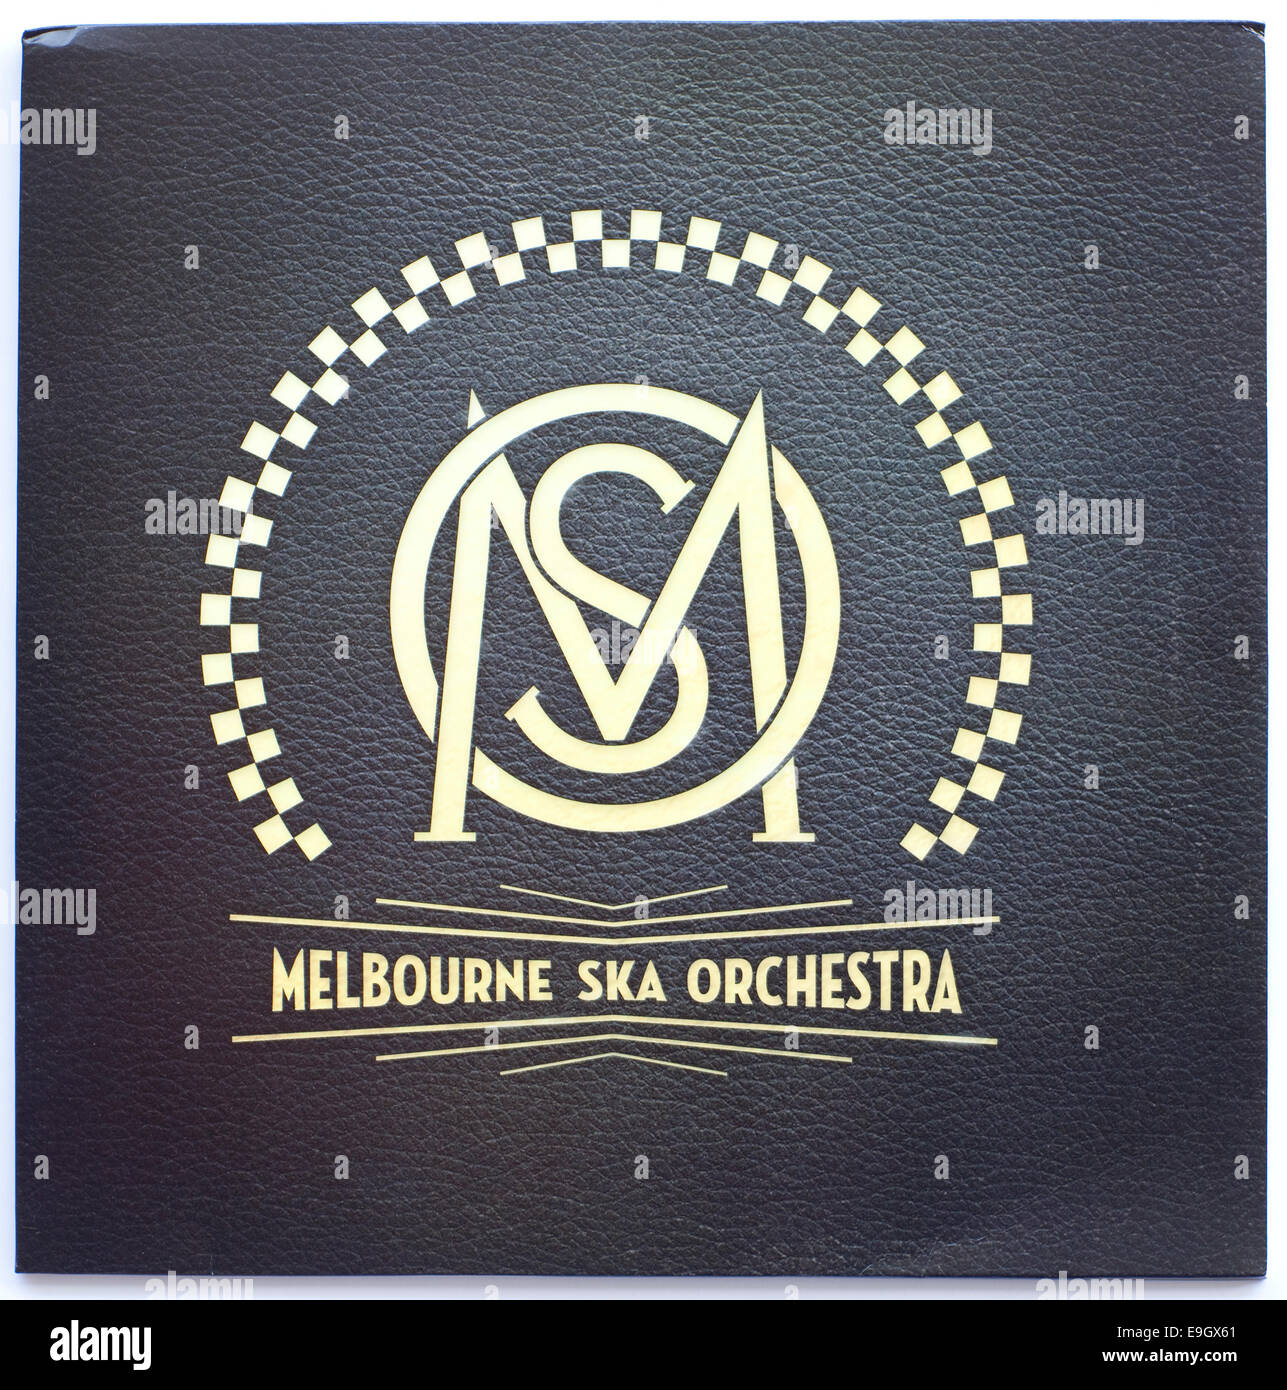 Cover art for Melbourne Ska Orchestra - Melbourne Ska Orchestra debut album on Four Four Music - Editorial use only Stock Photo